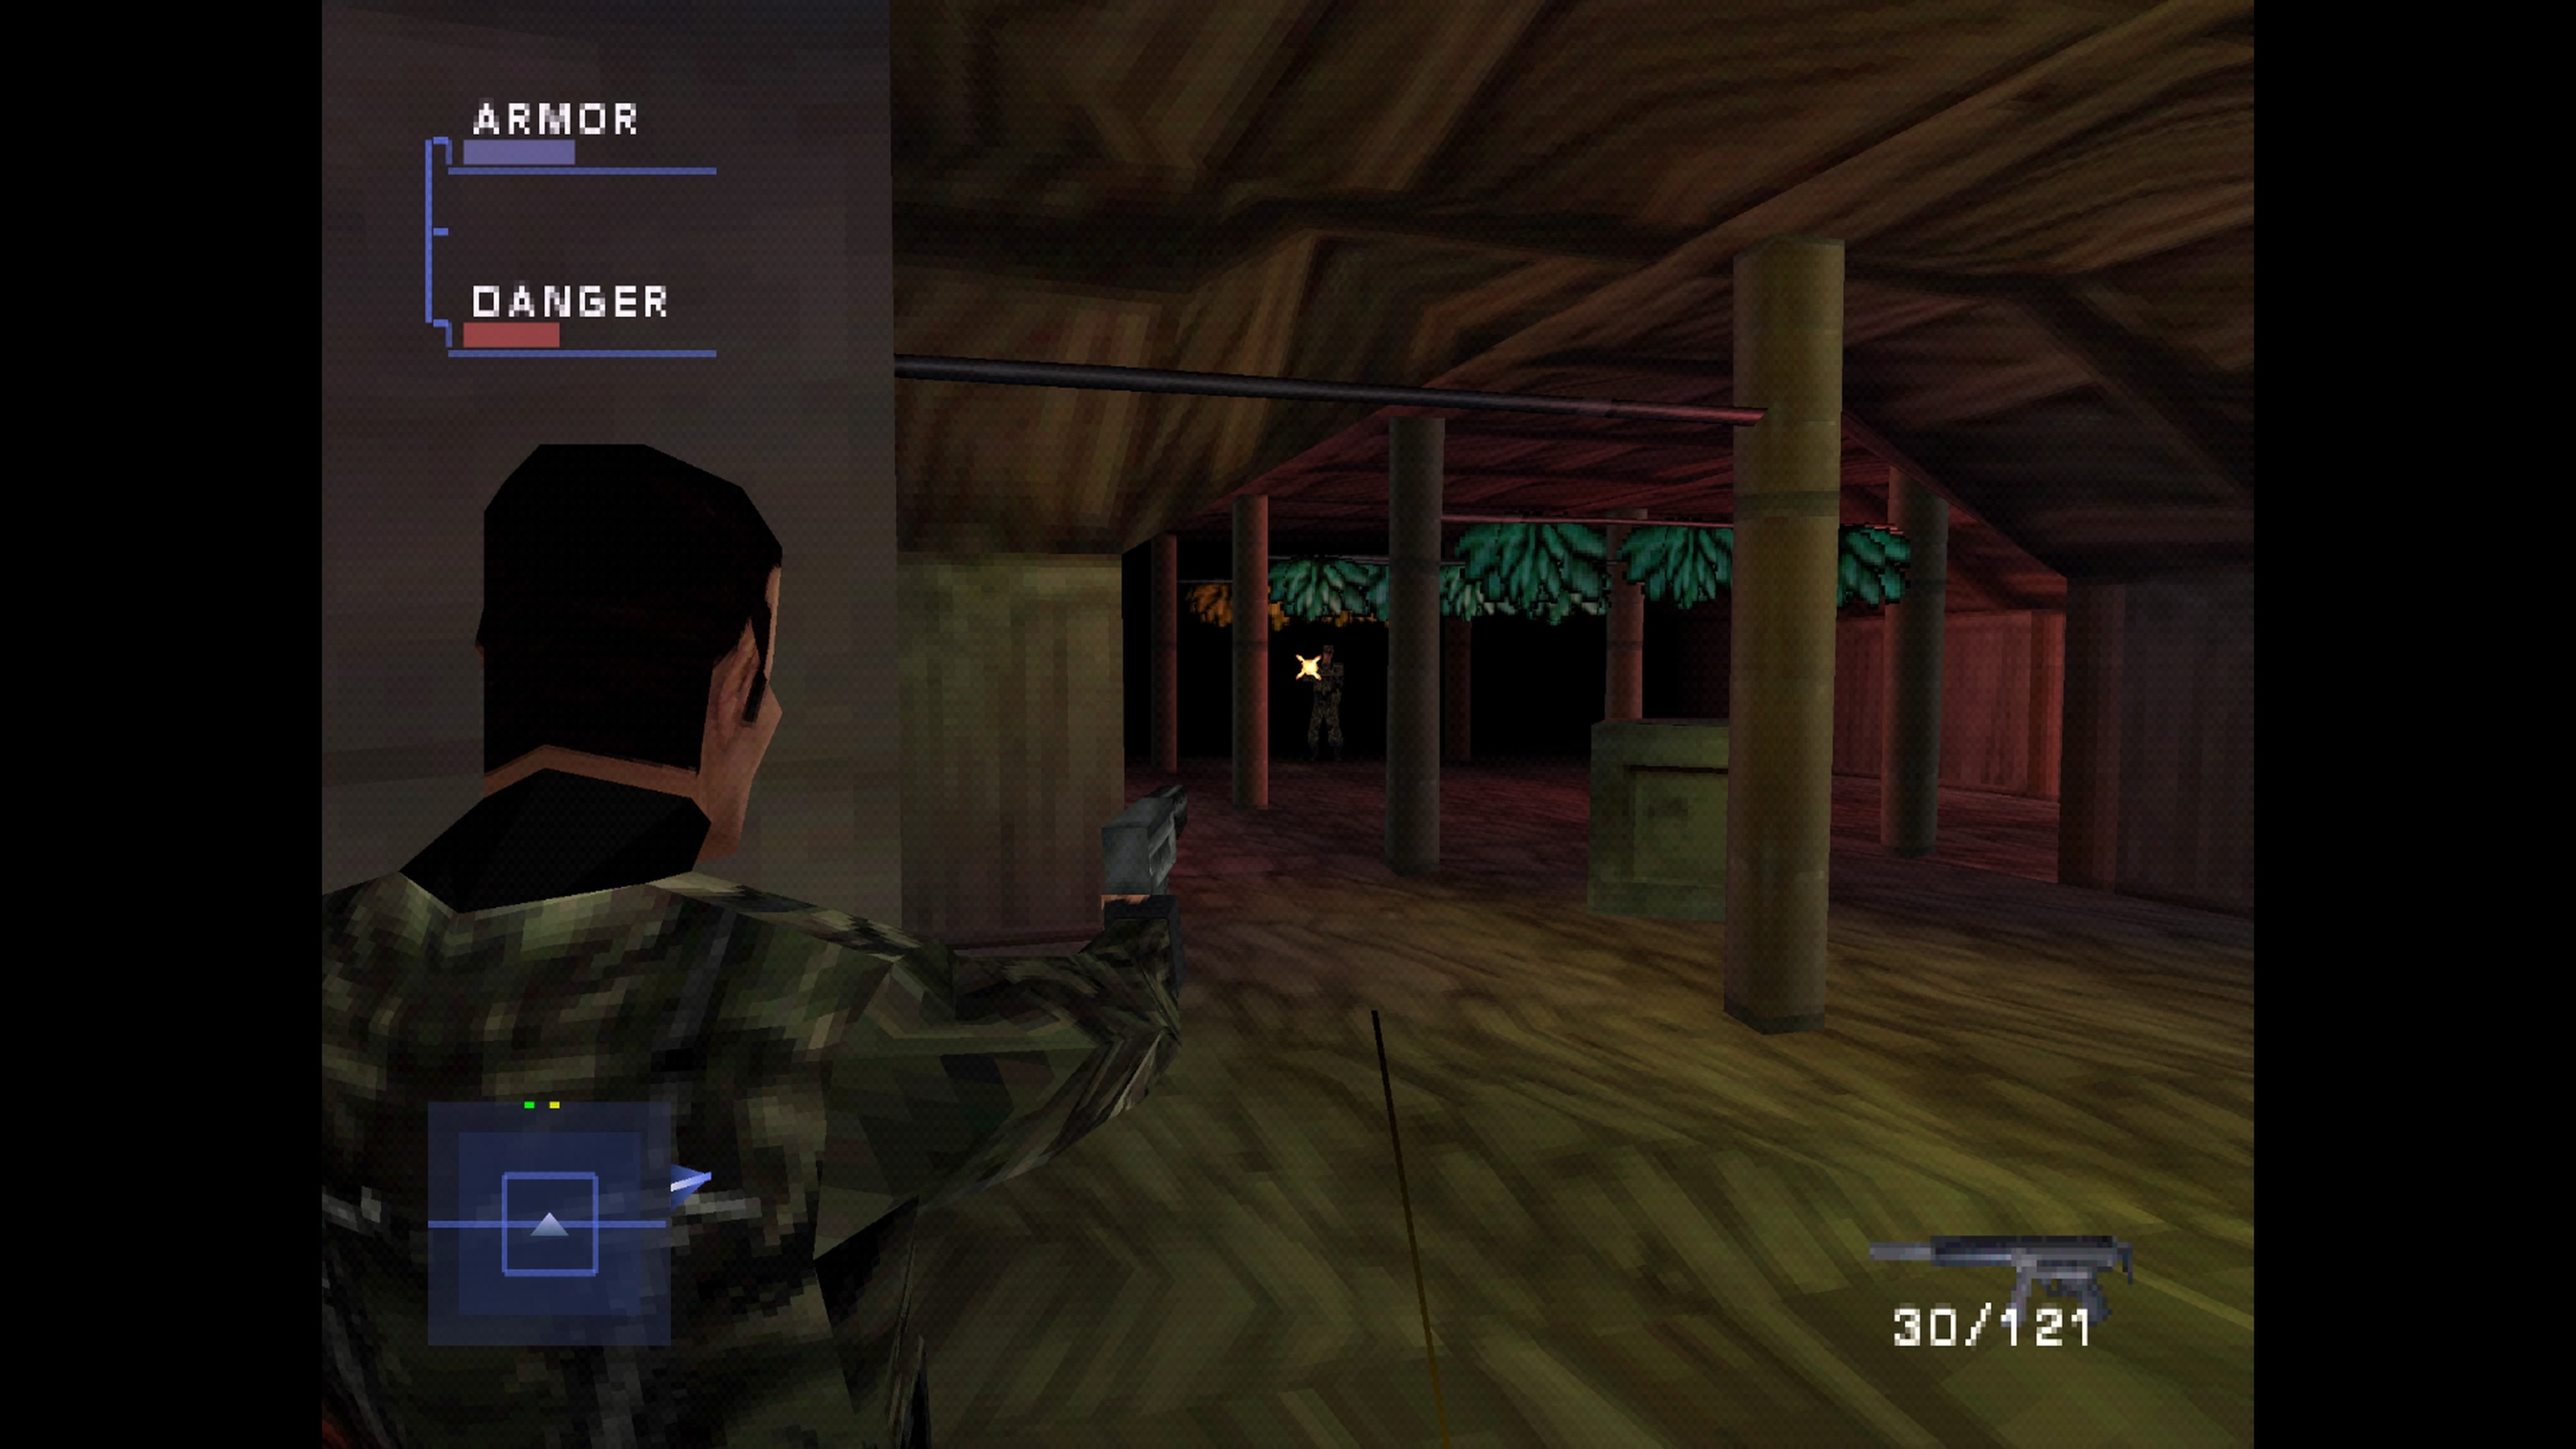  Syphon Filter 3 - PlayStation : Video Games